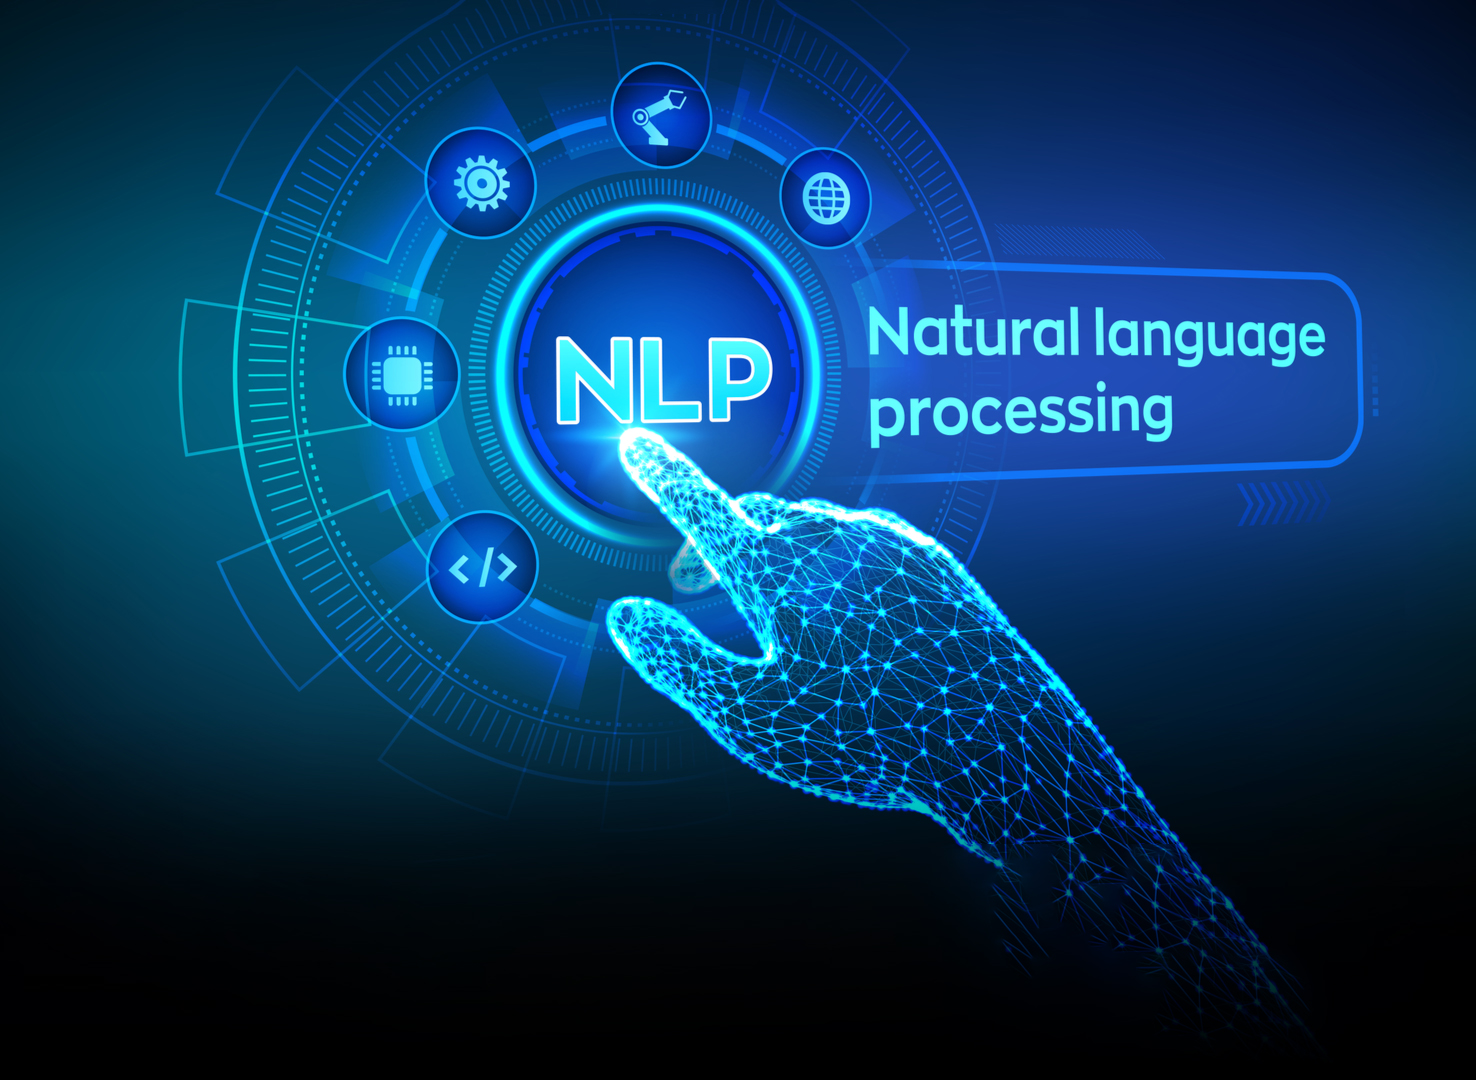 Future Trends in Natural Language Processing for 2022